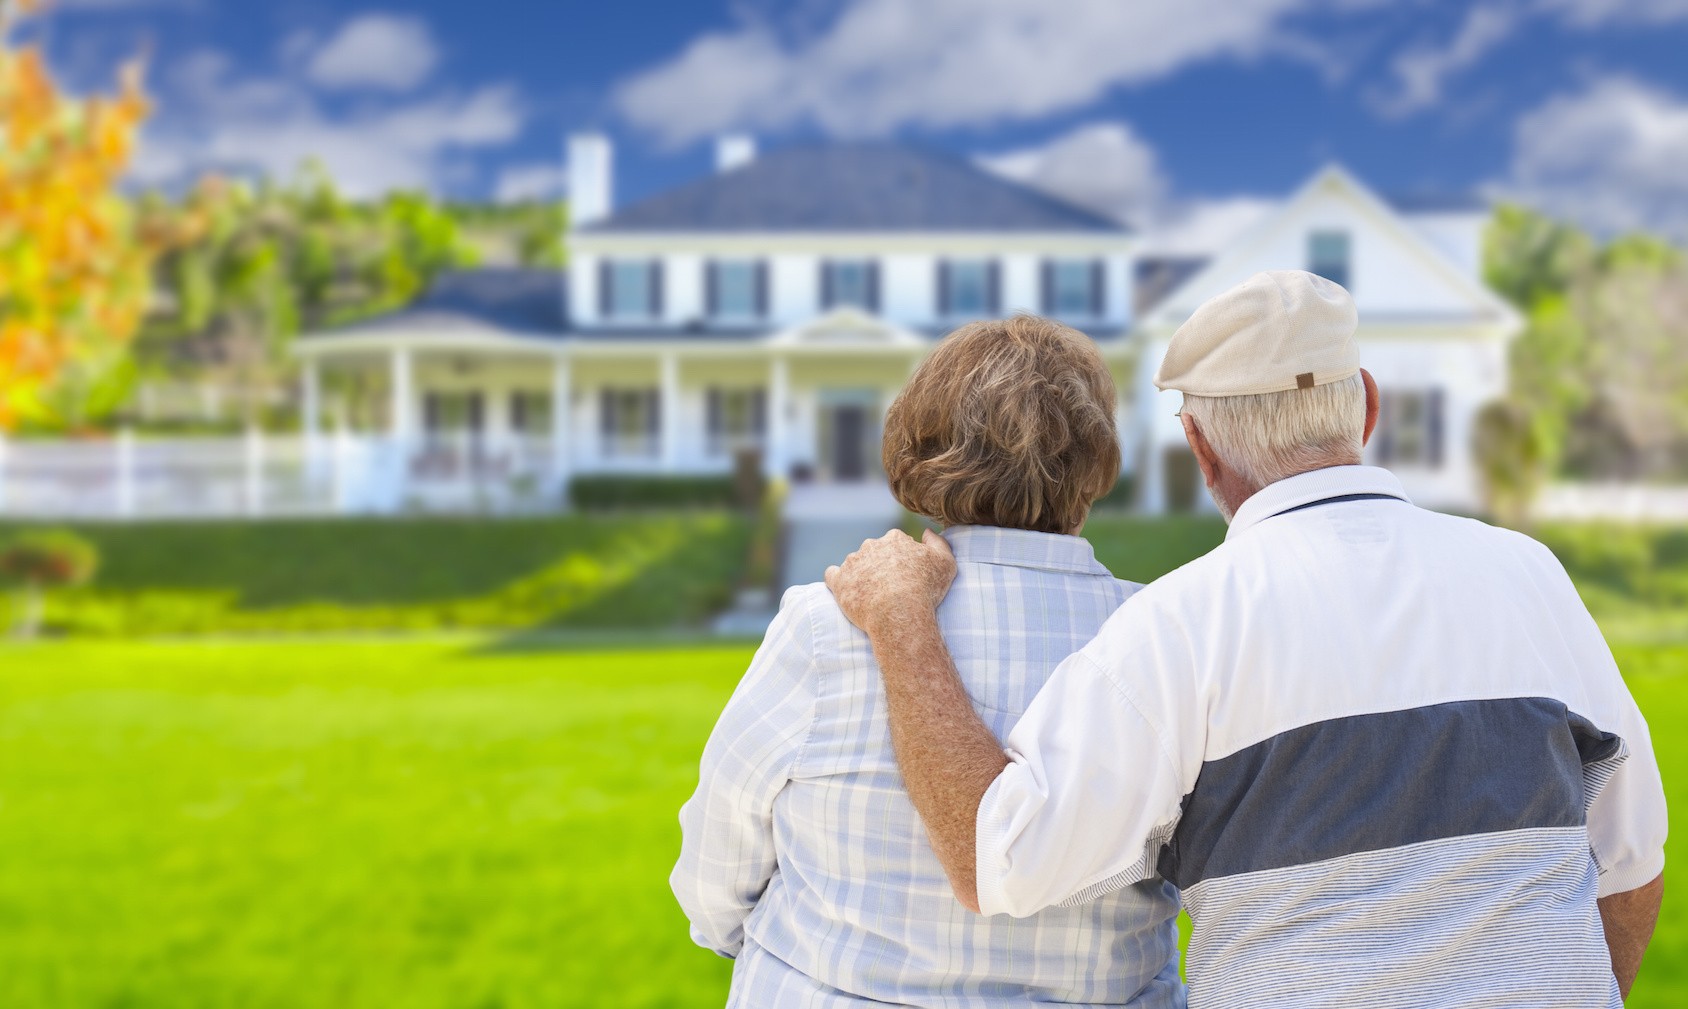 Senior couple standing in the foreground staring at a two story white colonial house with front porch. The man on the right has his left hand on the woman's shoulder.